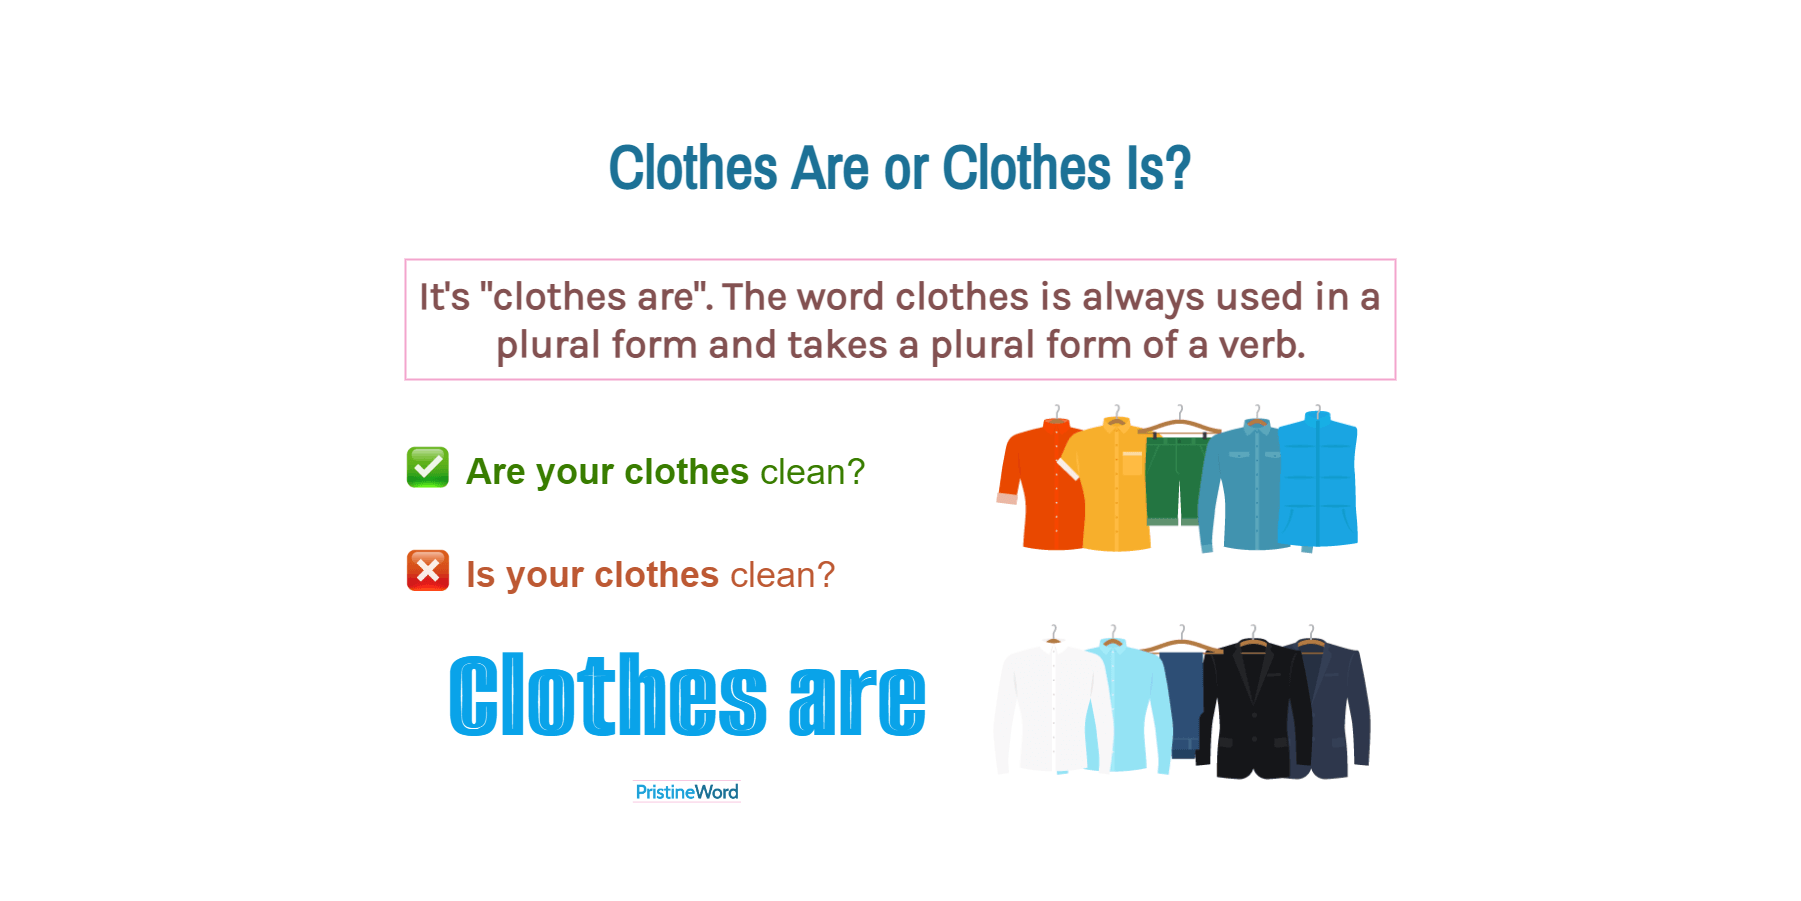 Clothes Are Or Clothes Is. Which Is Correct?